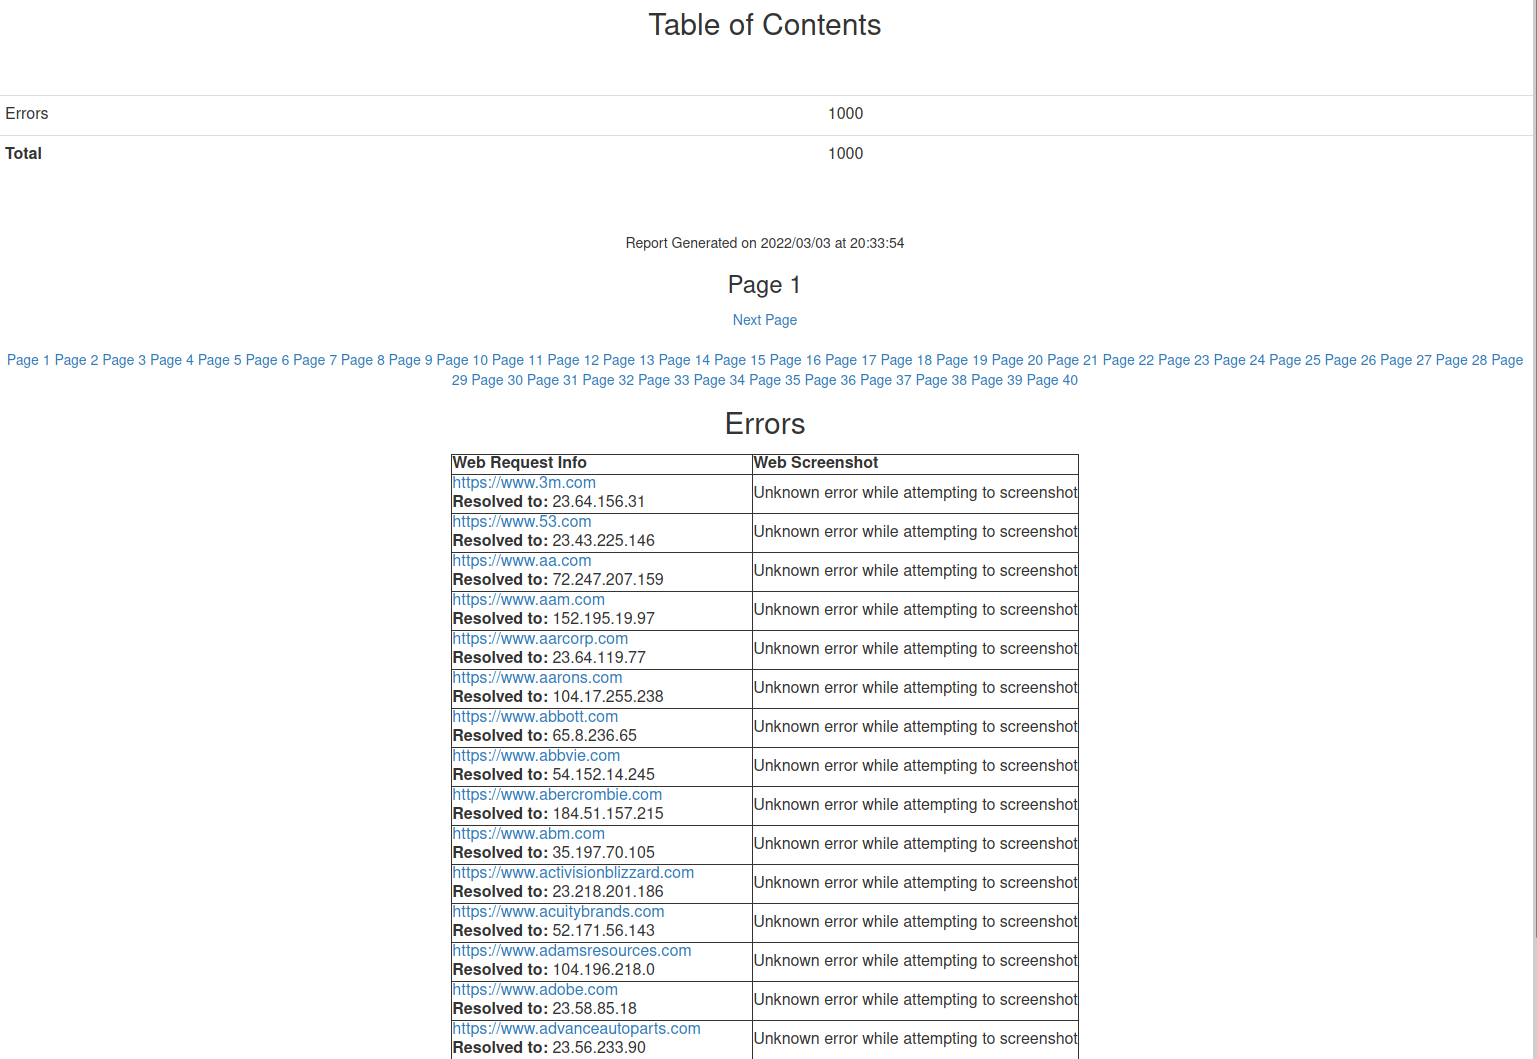 EyeWitness screenshot errors table of contents by White Oak Security.